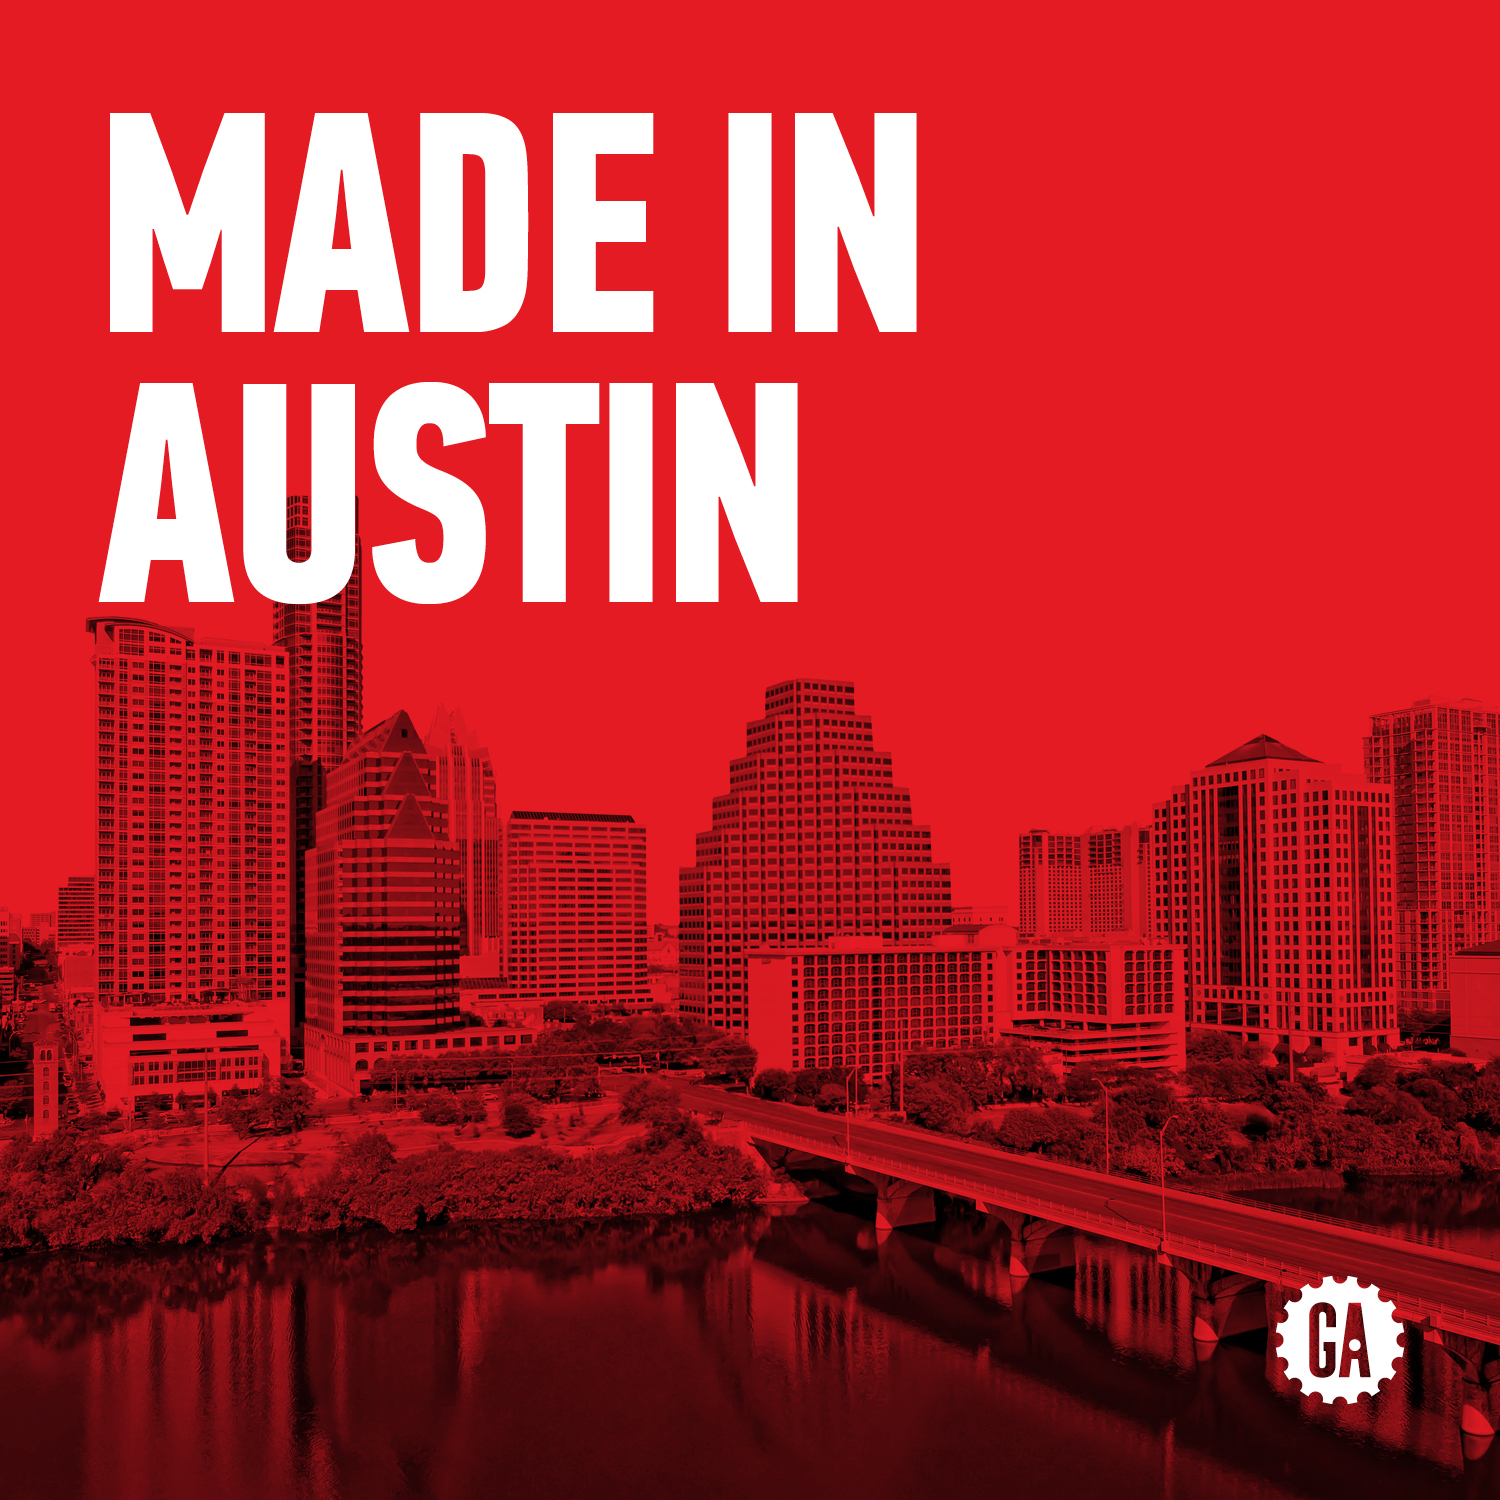 Made in Austin Events Events & Promotions The Austin Chronicle